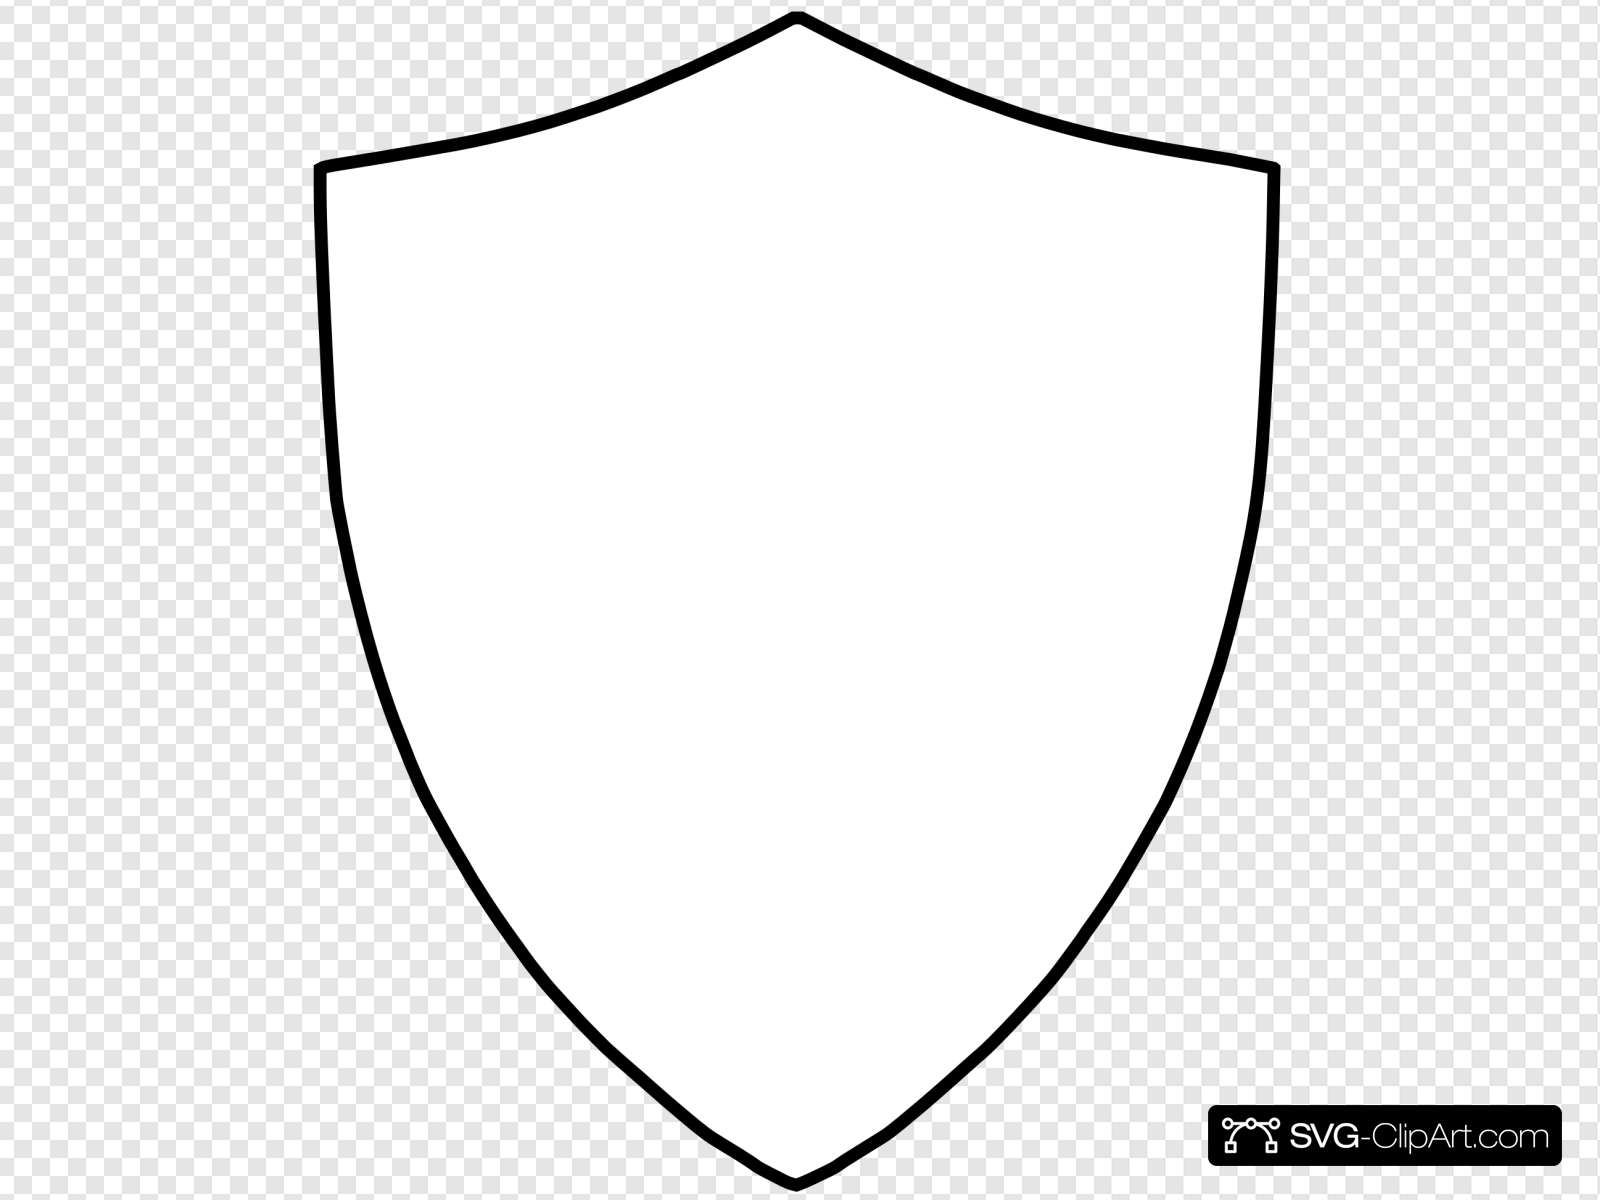 Badge Outline Clip art, Icon and SVG